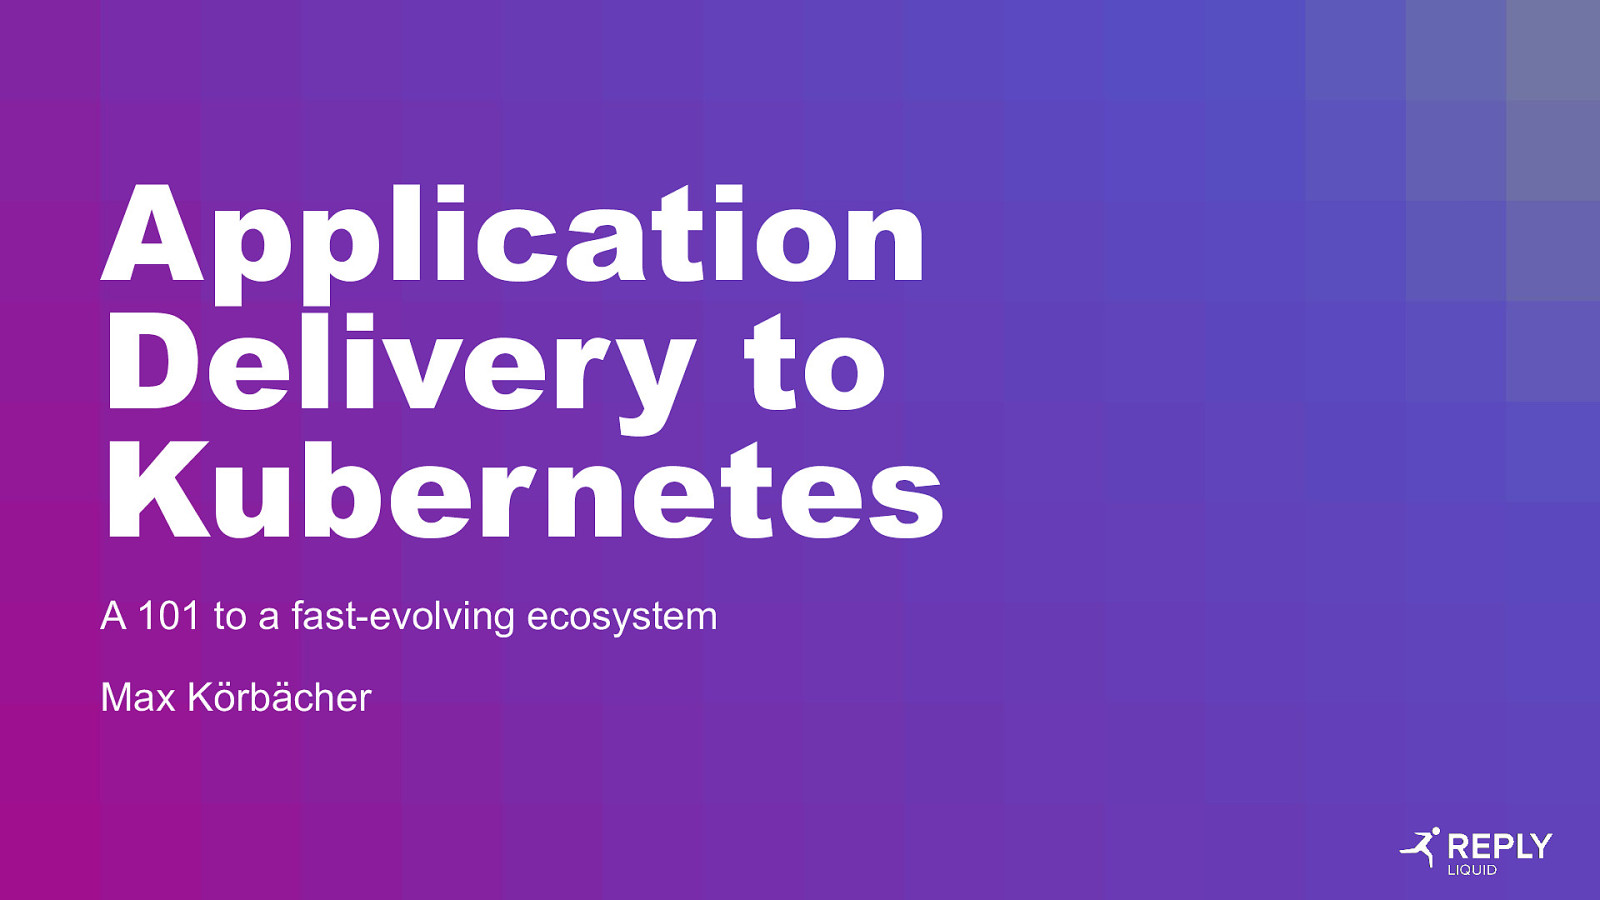 Application Delivery to Kubernetes